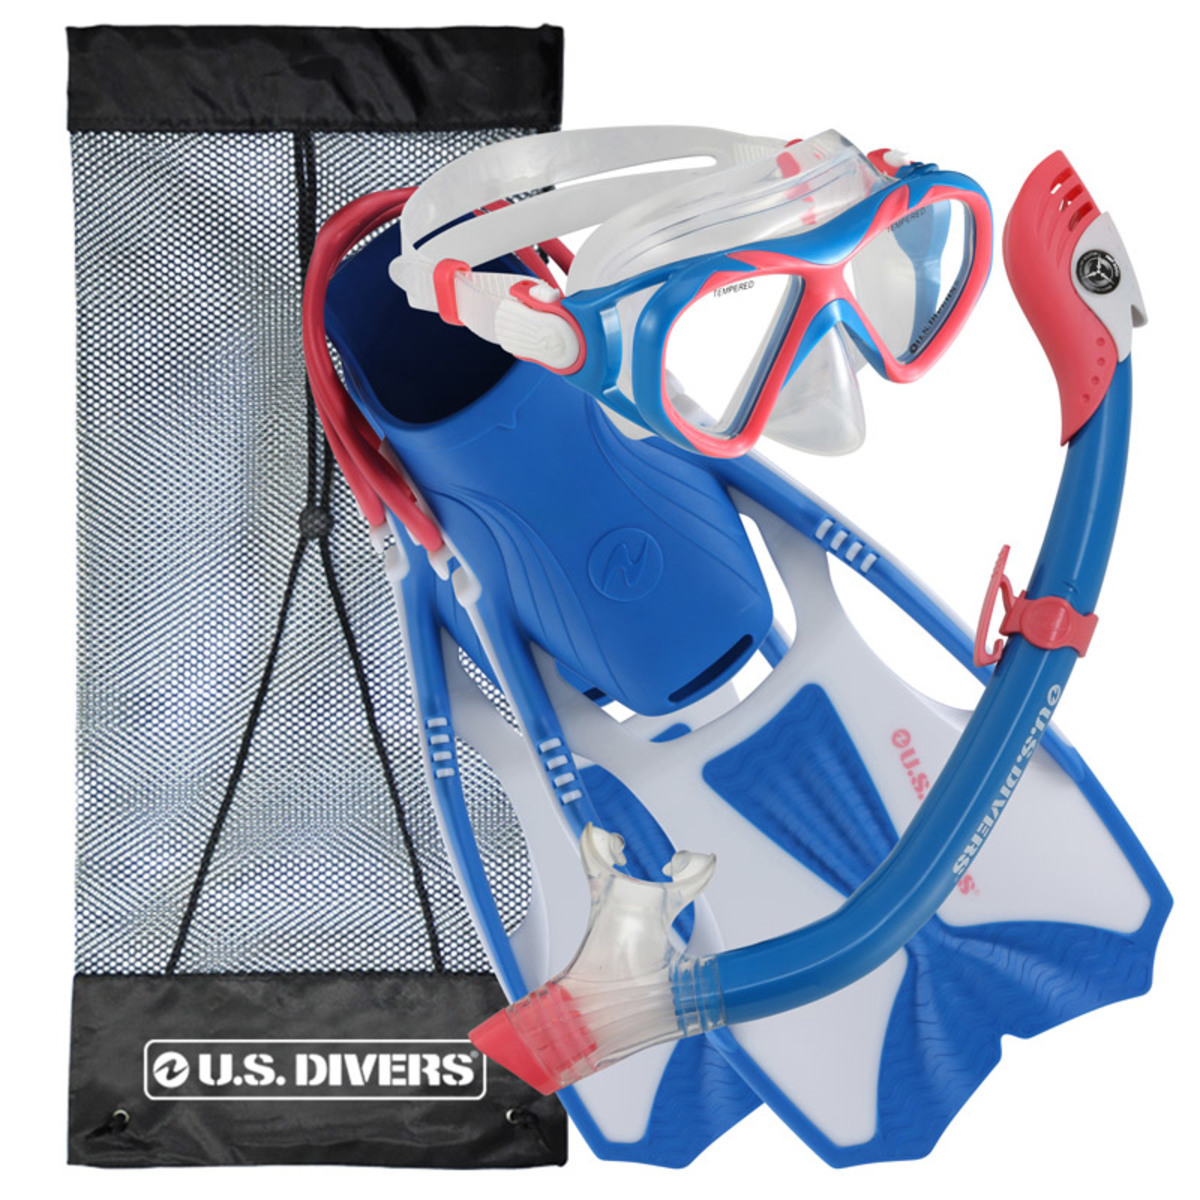 US Divers Youth Snorkel Set in Coral, Small